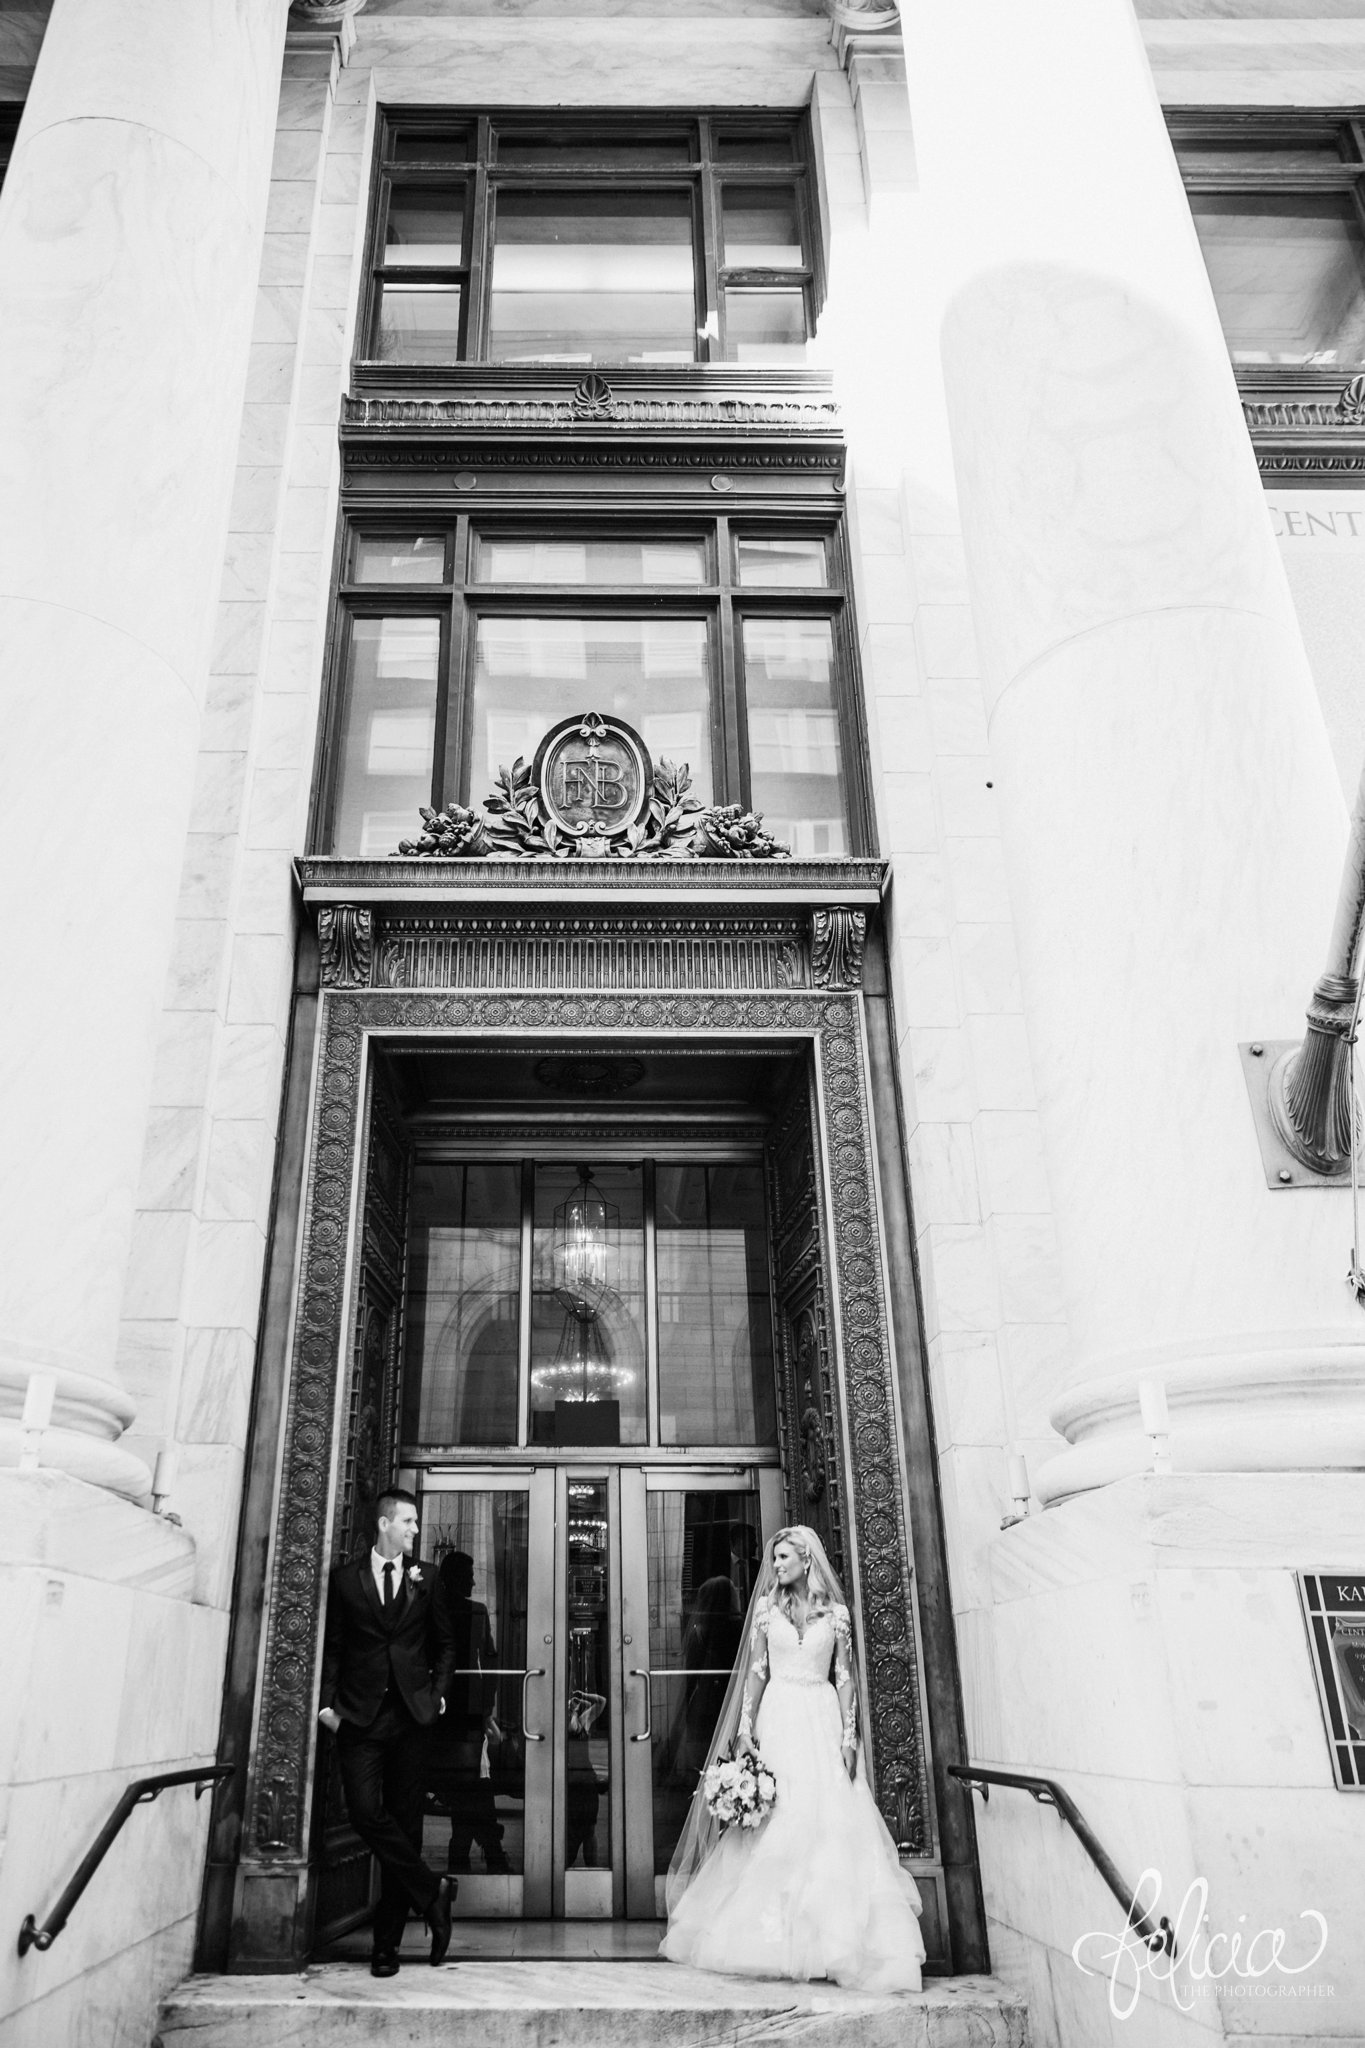 images by feliciathephotographer.com | wedding photographer | kansas city | redemptorist | classic | portrait | black and white | romantic | intimate | lace long sleeve dress | belle vogue | whimsical | glamor | library | power couple |